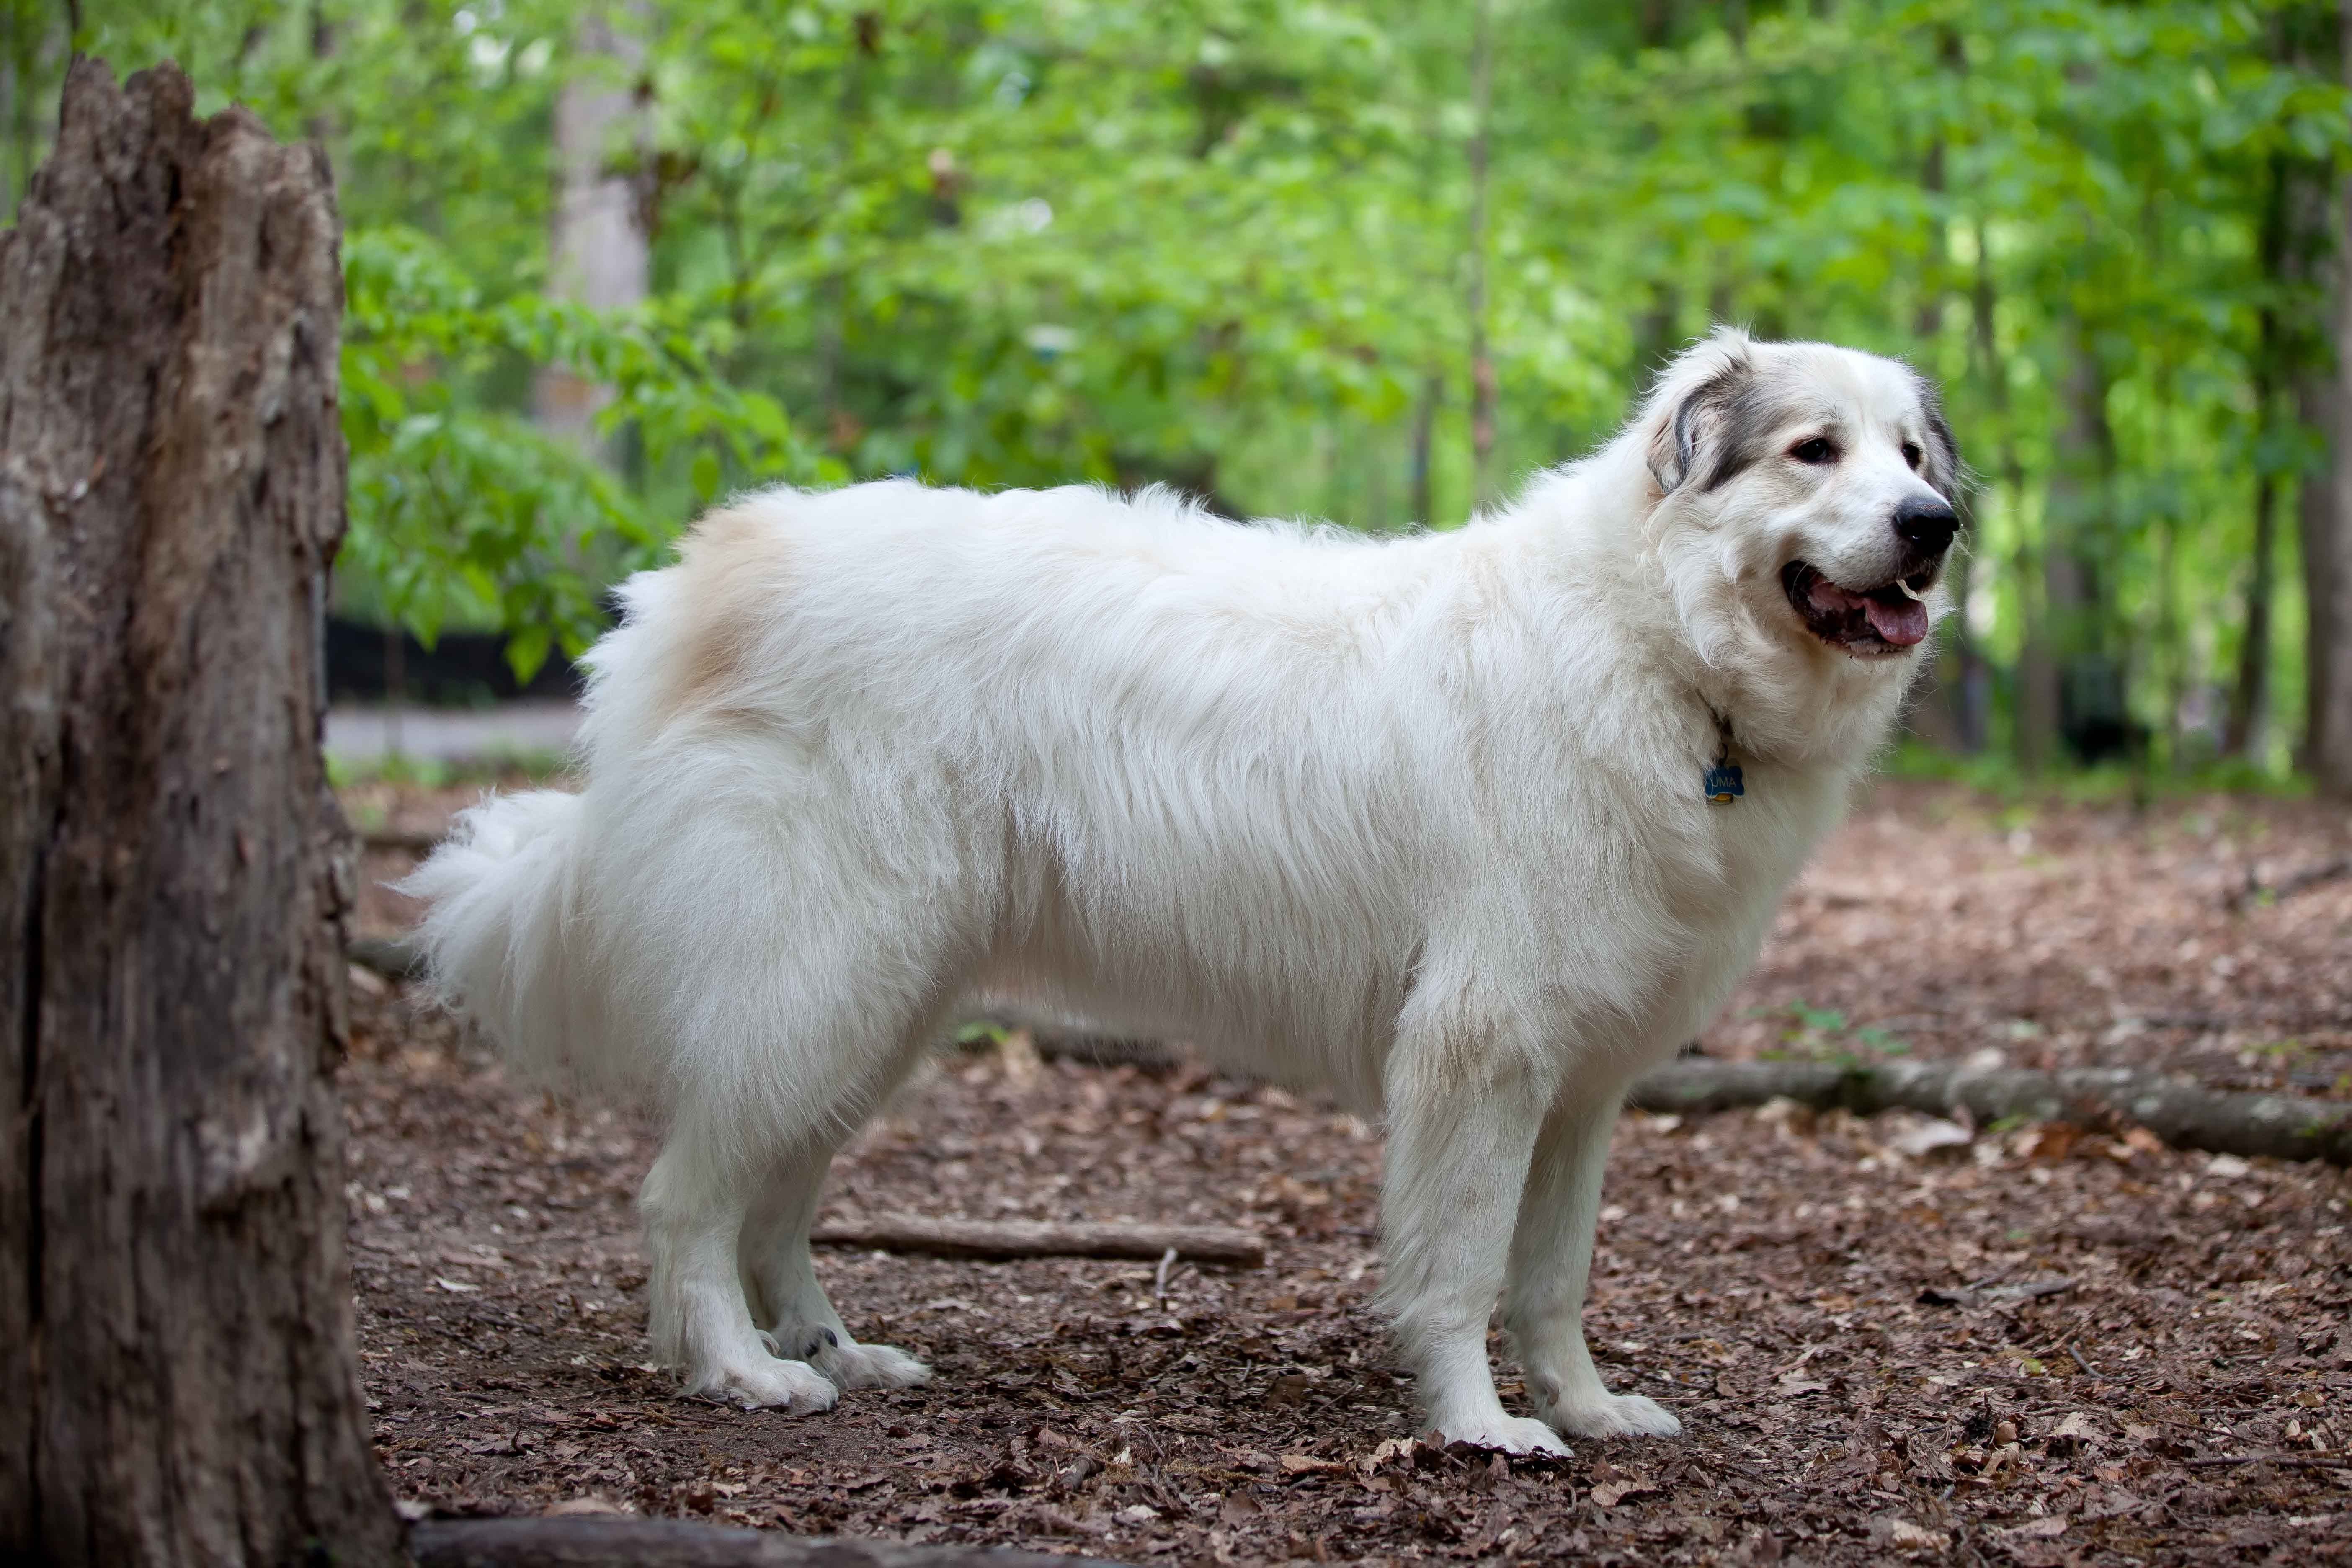 Great Pyrenees dog in the forest wallpaper and image, picture, photo